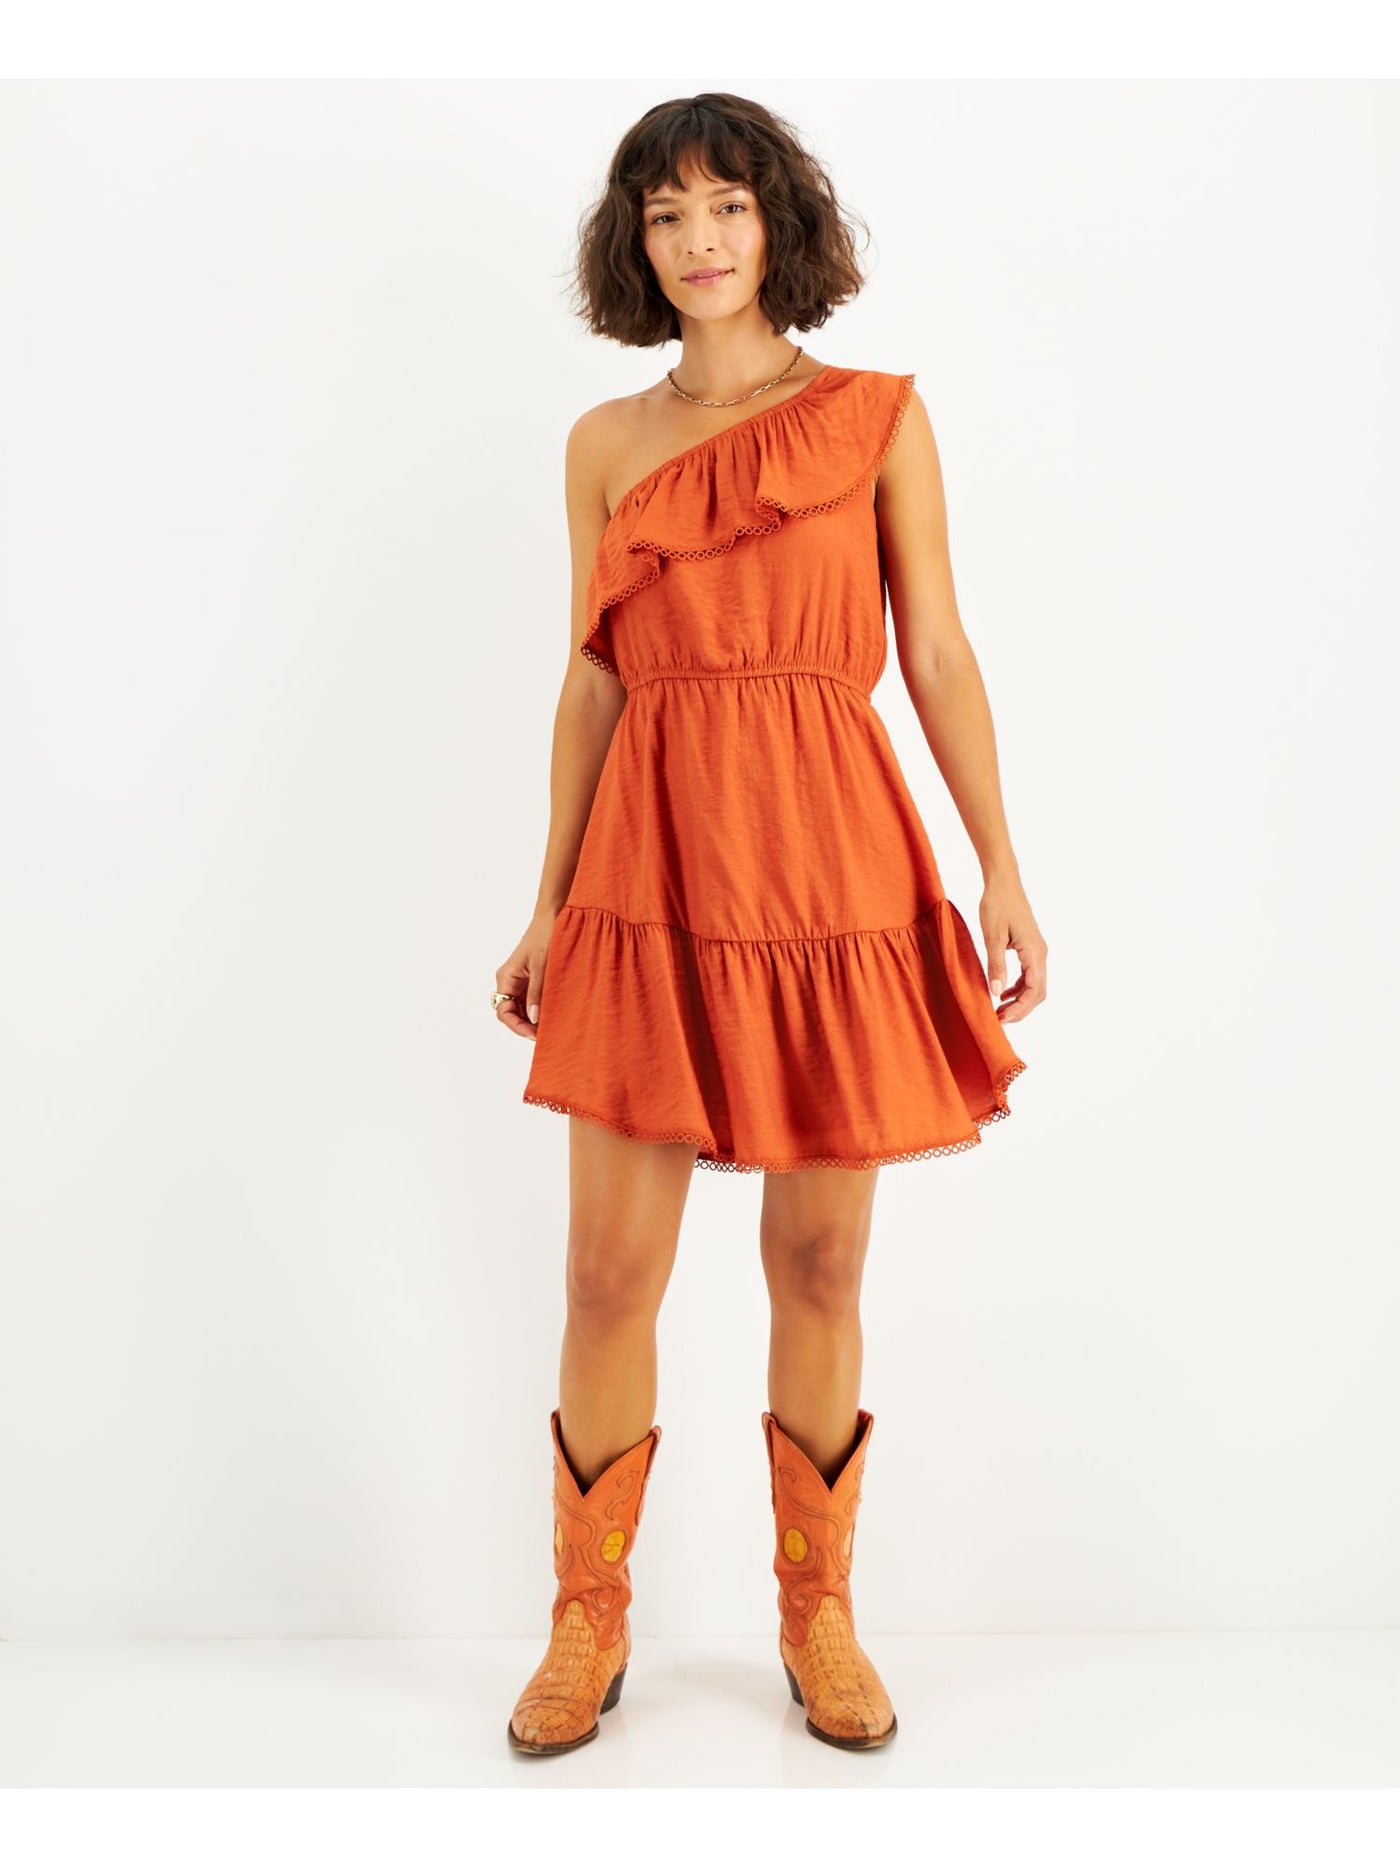 BAR III DRESSES Womens Orange Lined Pullover Cap Sleeve Asymmetrical Neckline Above The Knee Cocktail Fit + Flare Dress S